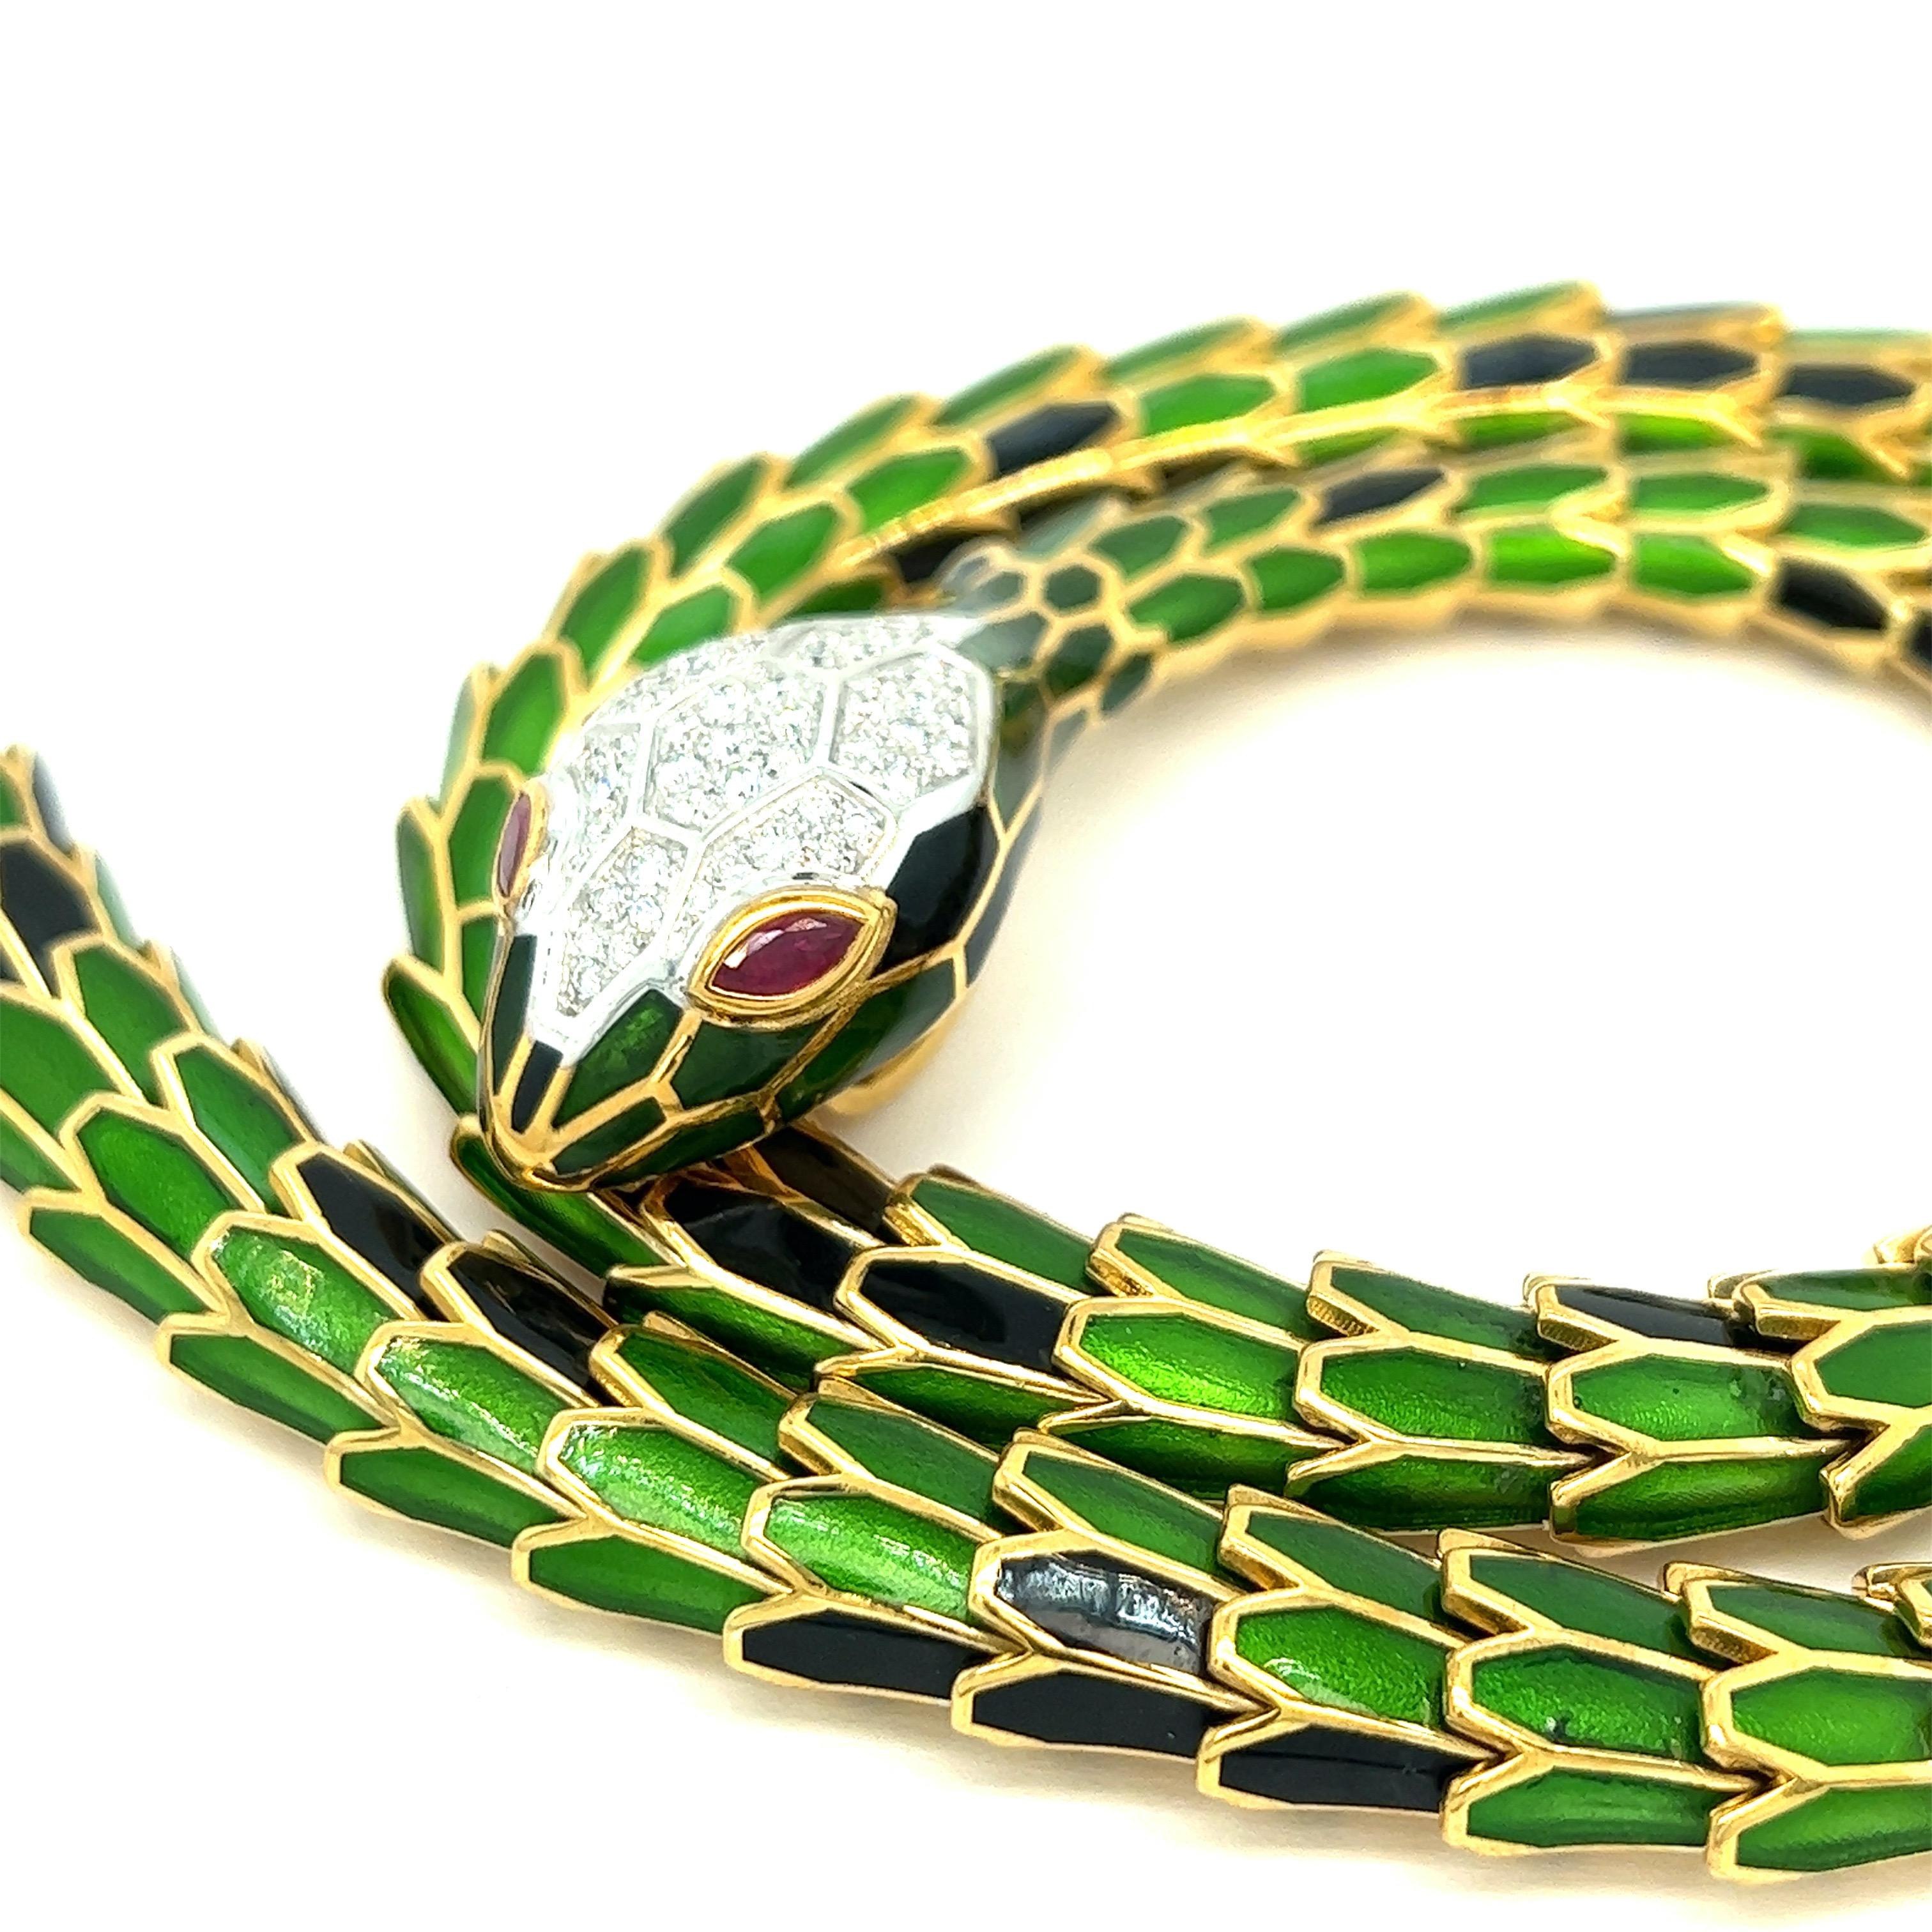 Transparent green and black enamel snake necklace, short model

Round-cut diamonds of 1.20 carats, Marquise-shaped rubies of 0.56 carat, 18 karat white gold, silver with a tone of yellow gold; marked 750, 925, D. 1.20, R. 0.56,